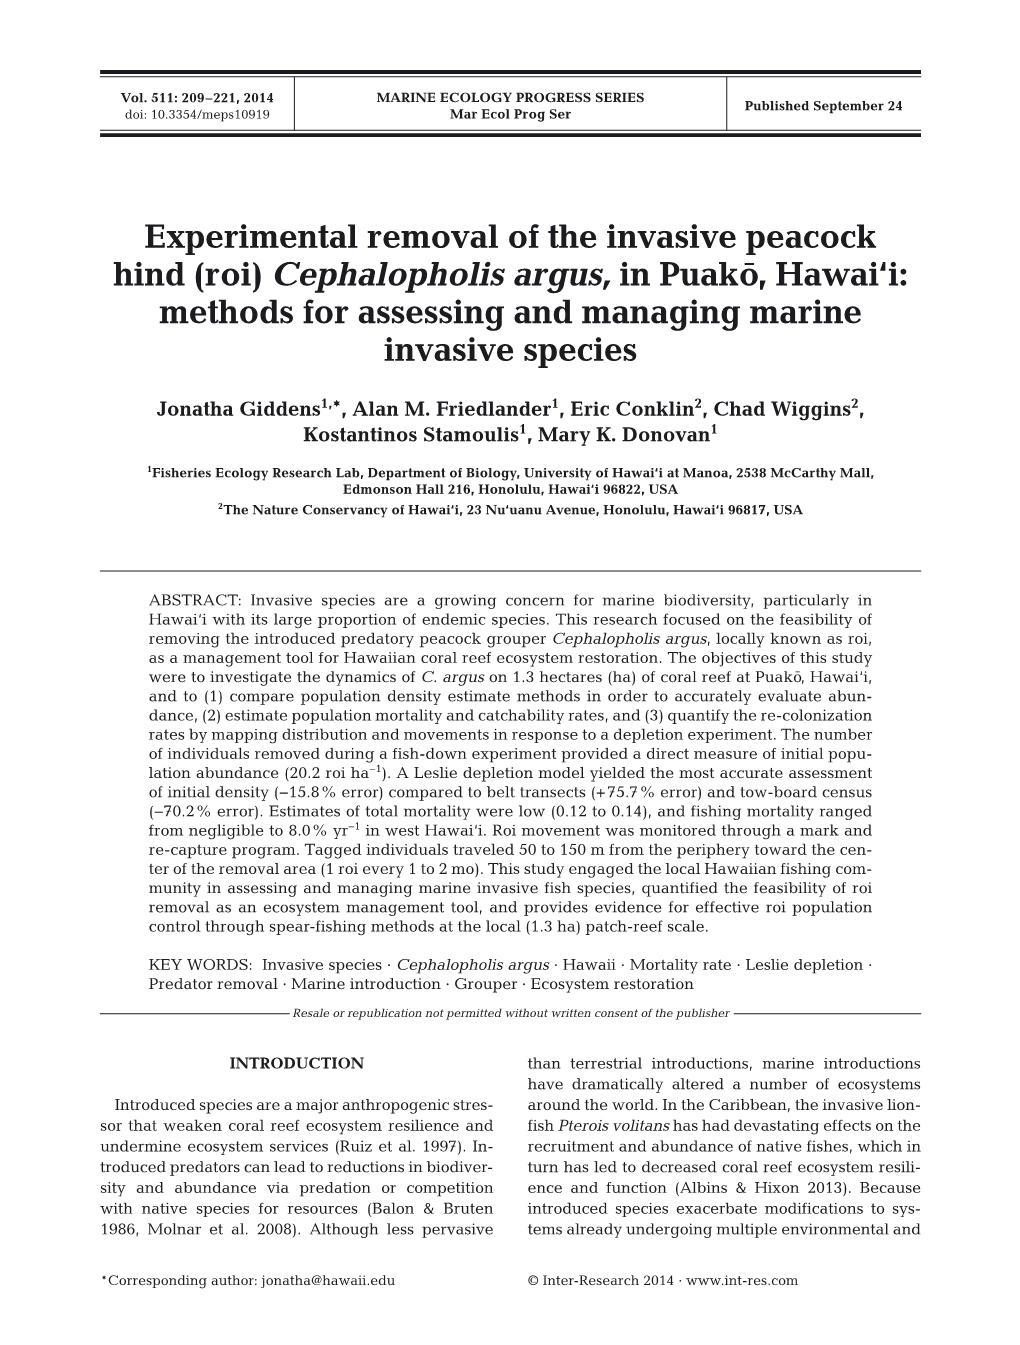 Experimental Removal of the Invasive Peacock Hind (Roi) Cephalopholis Argus, in Puako¯, Hawai‘I: Methods for Assessing and Managing Marine Invasive Species